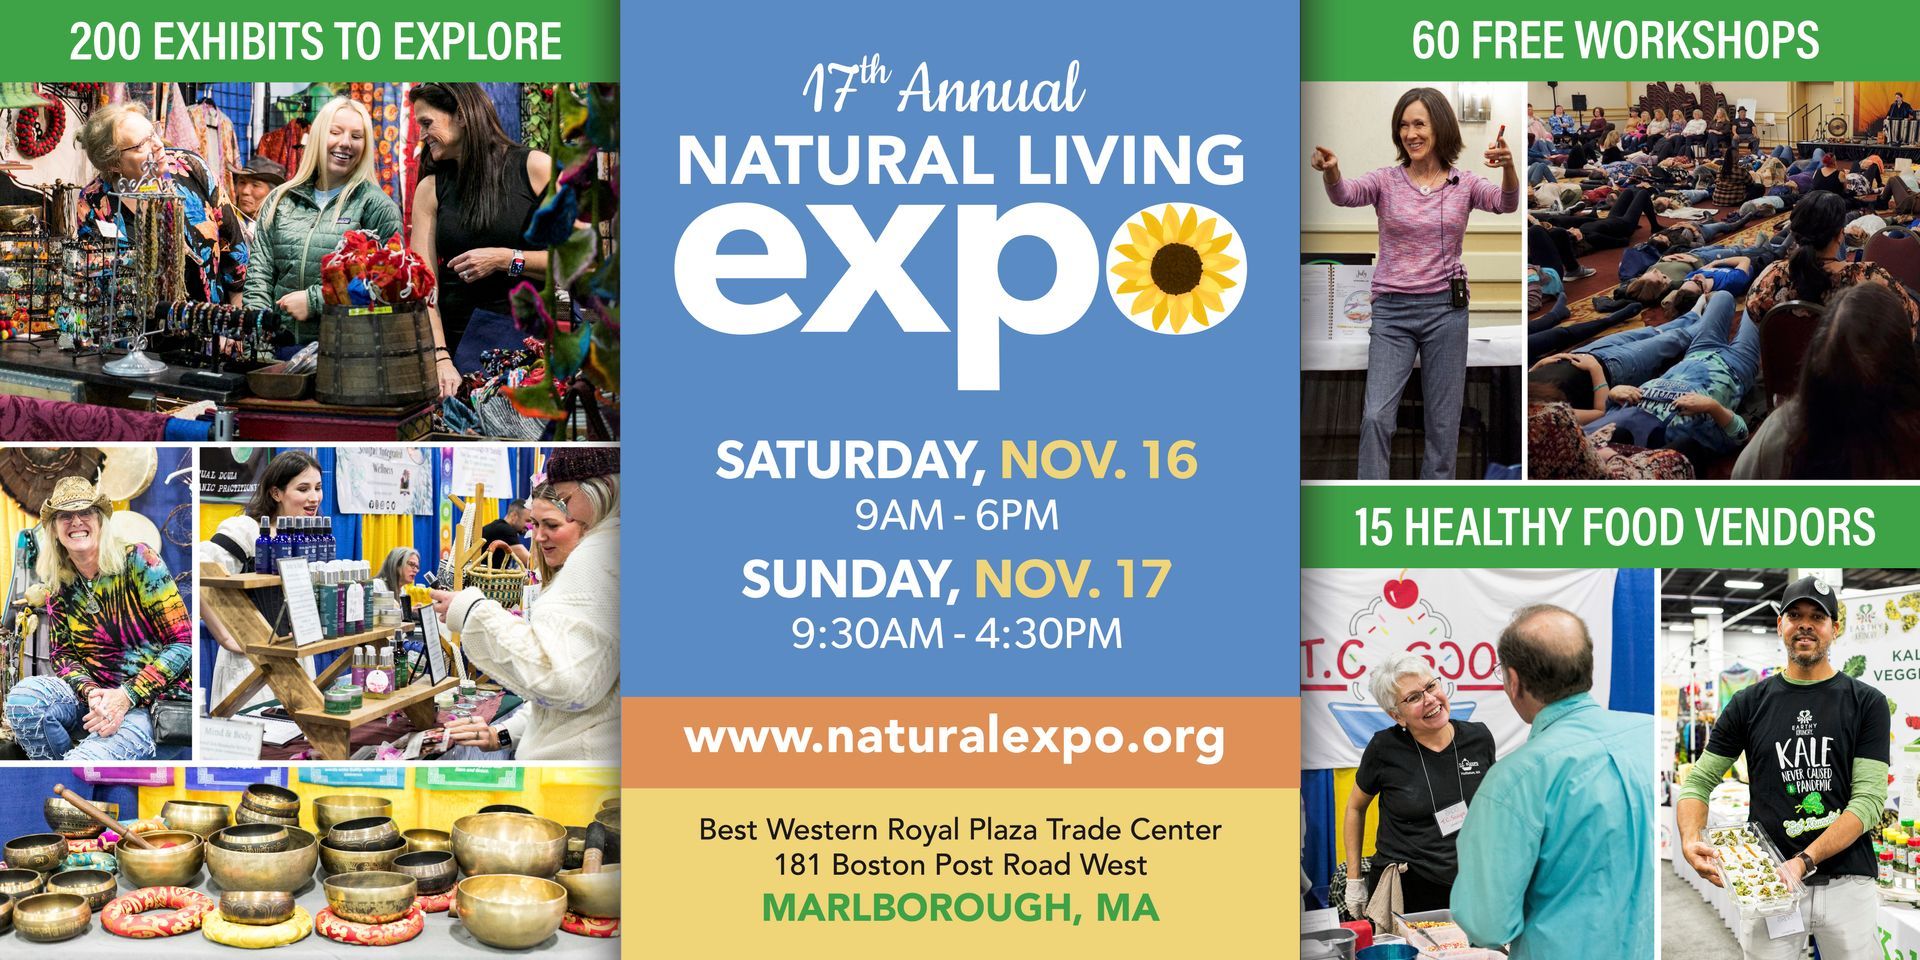 A poster for the natural living expo on saturday november 16